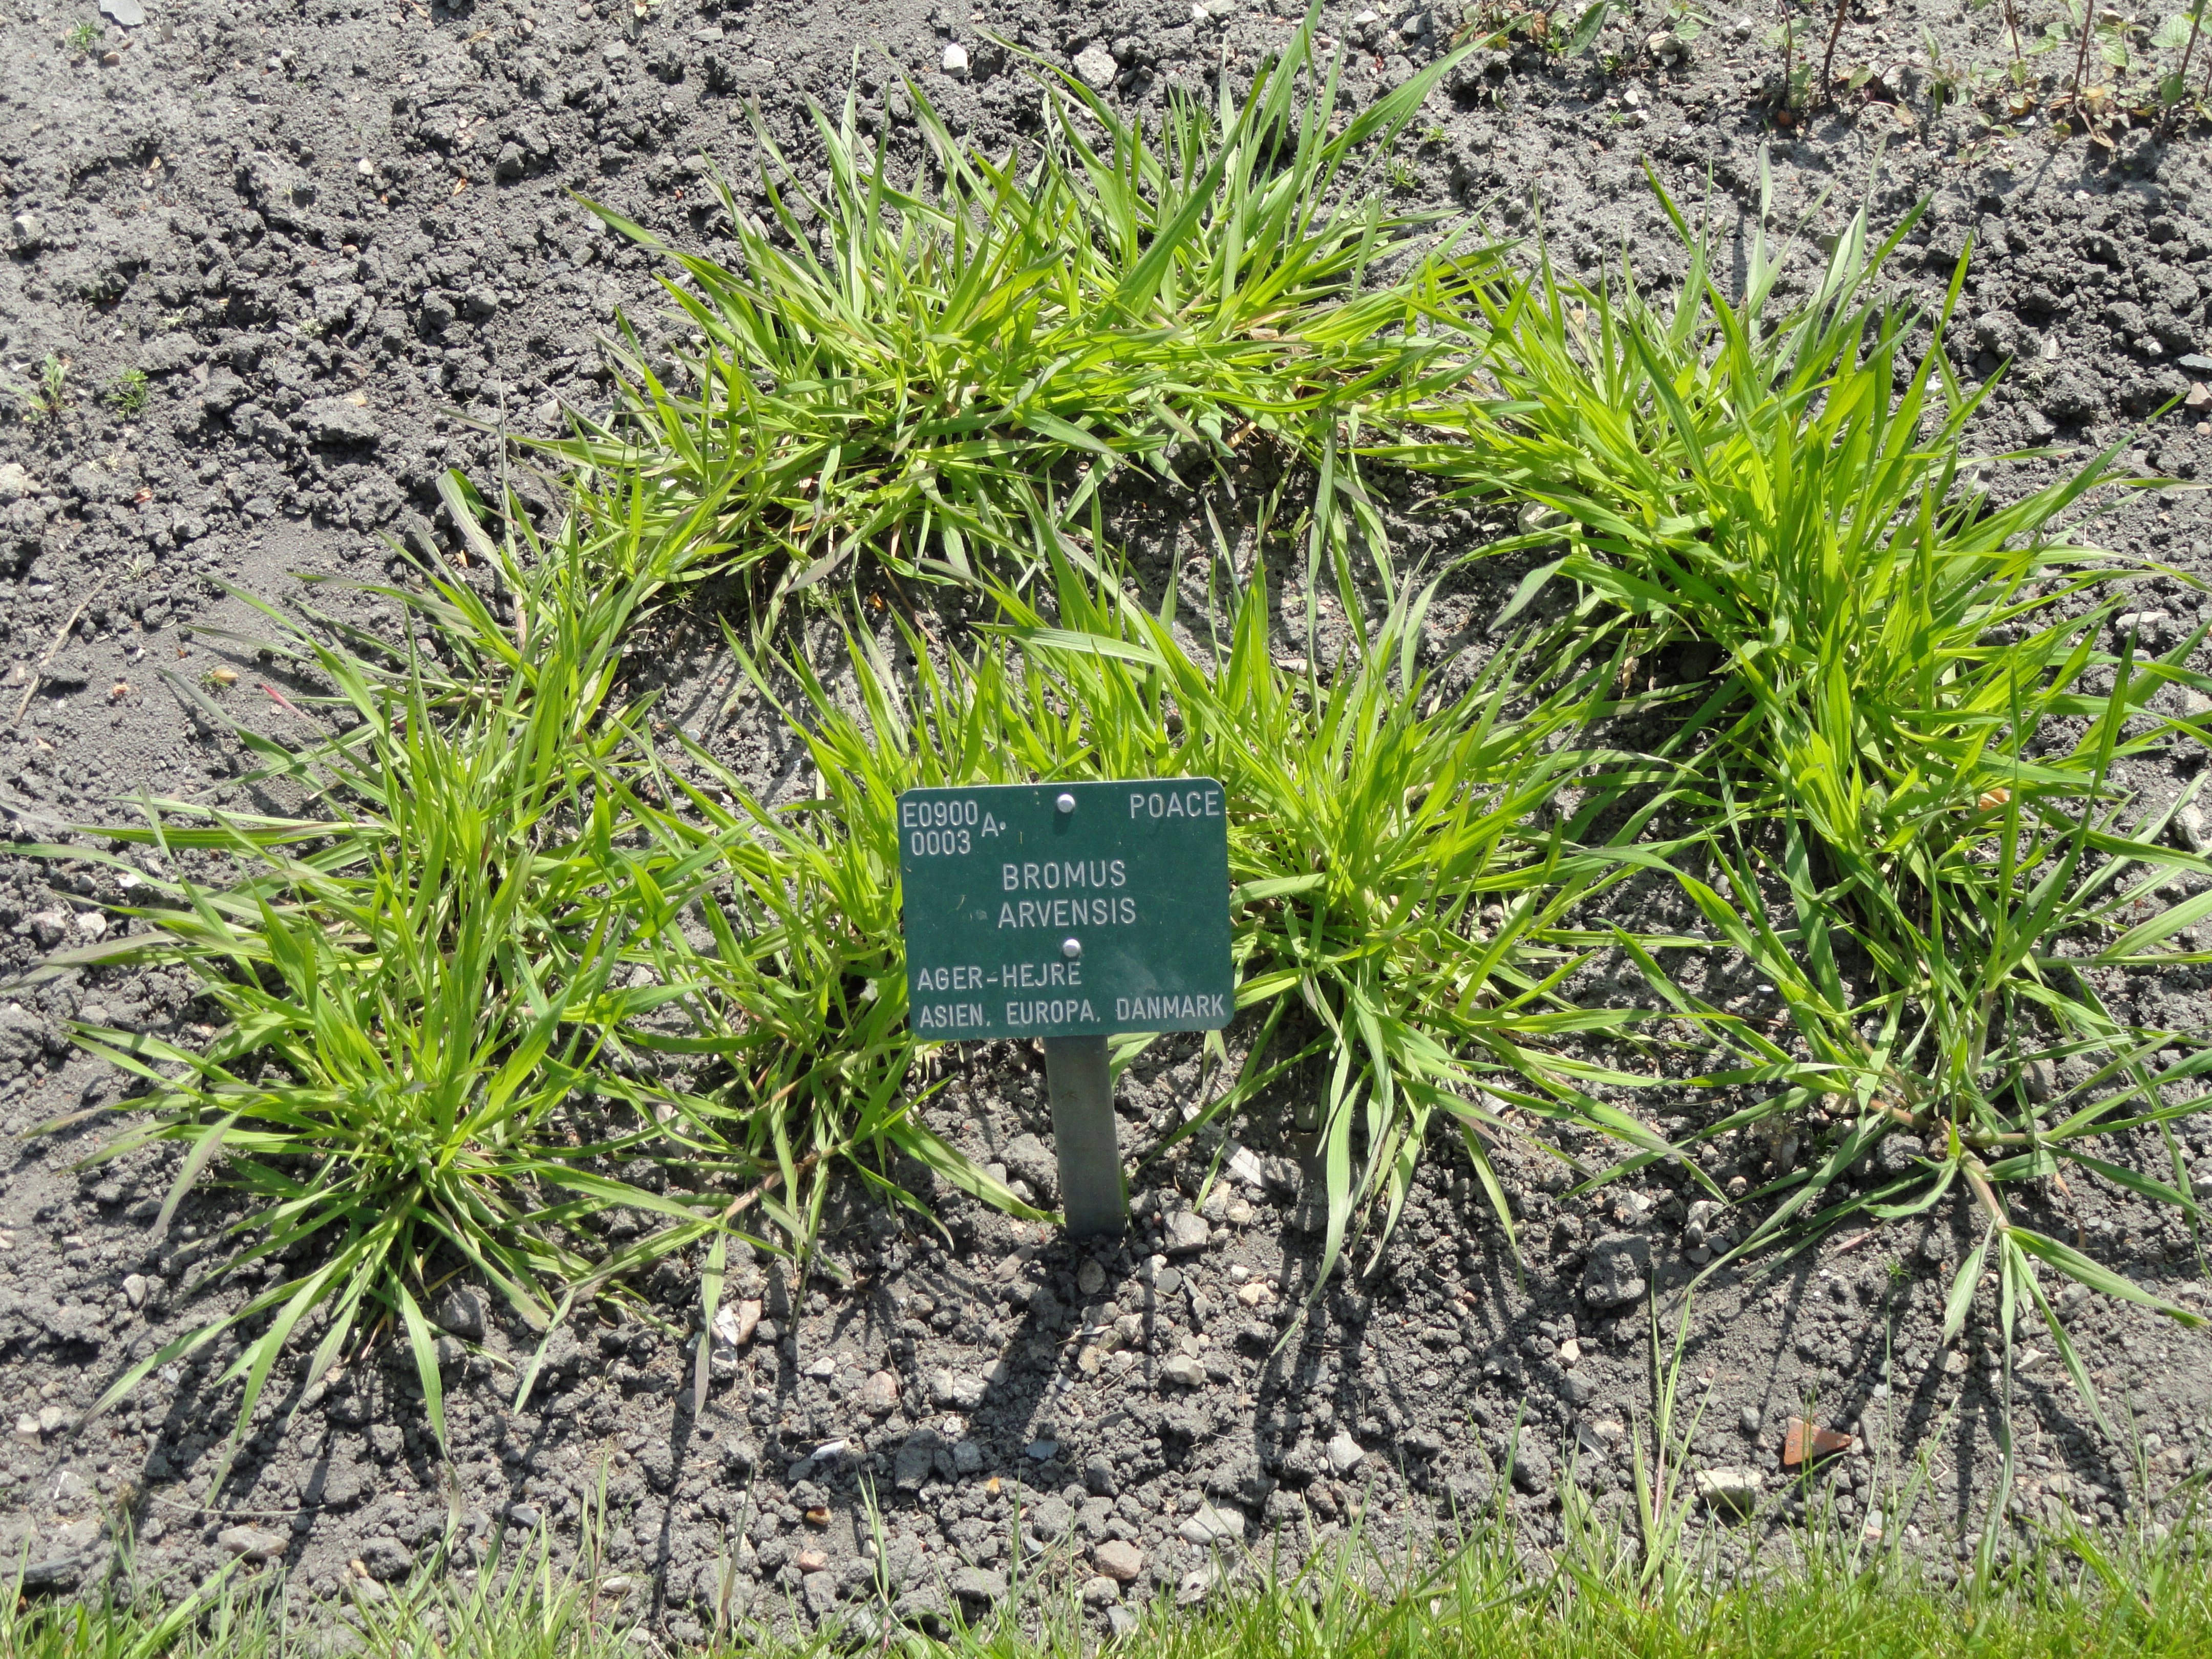 Growth habit in early stages before seedheads have formed